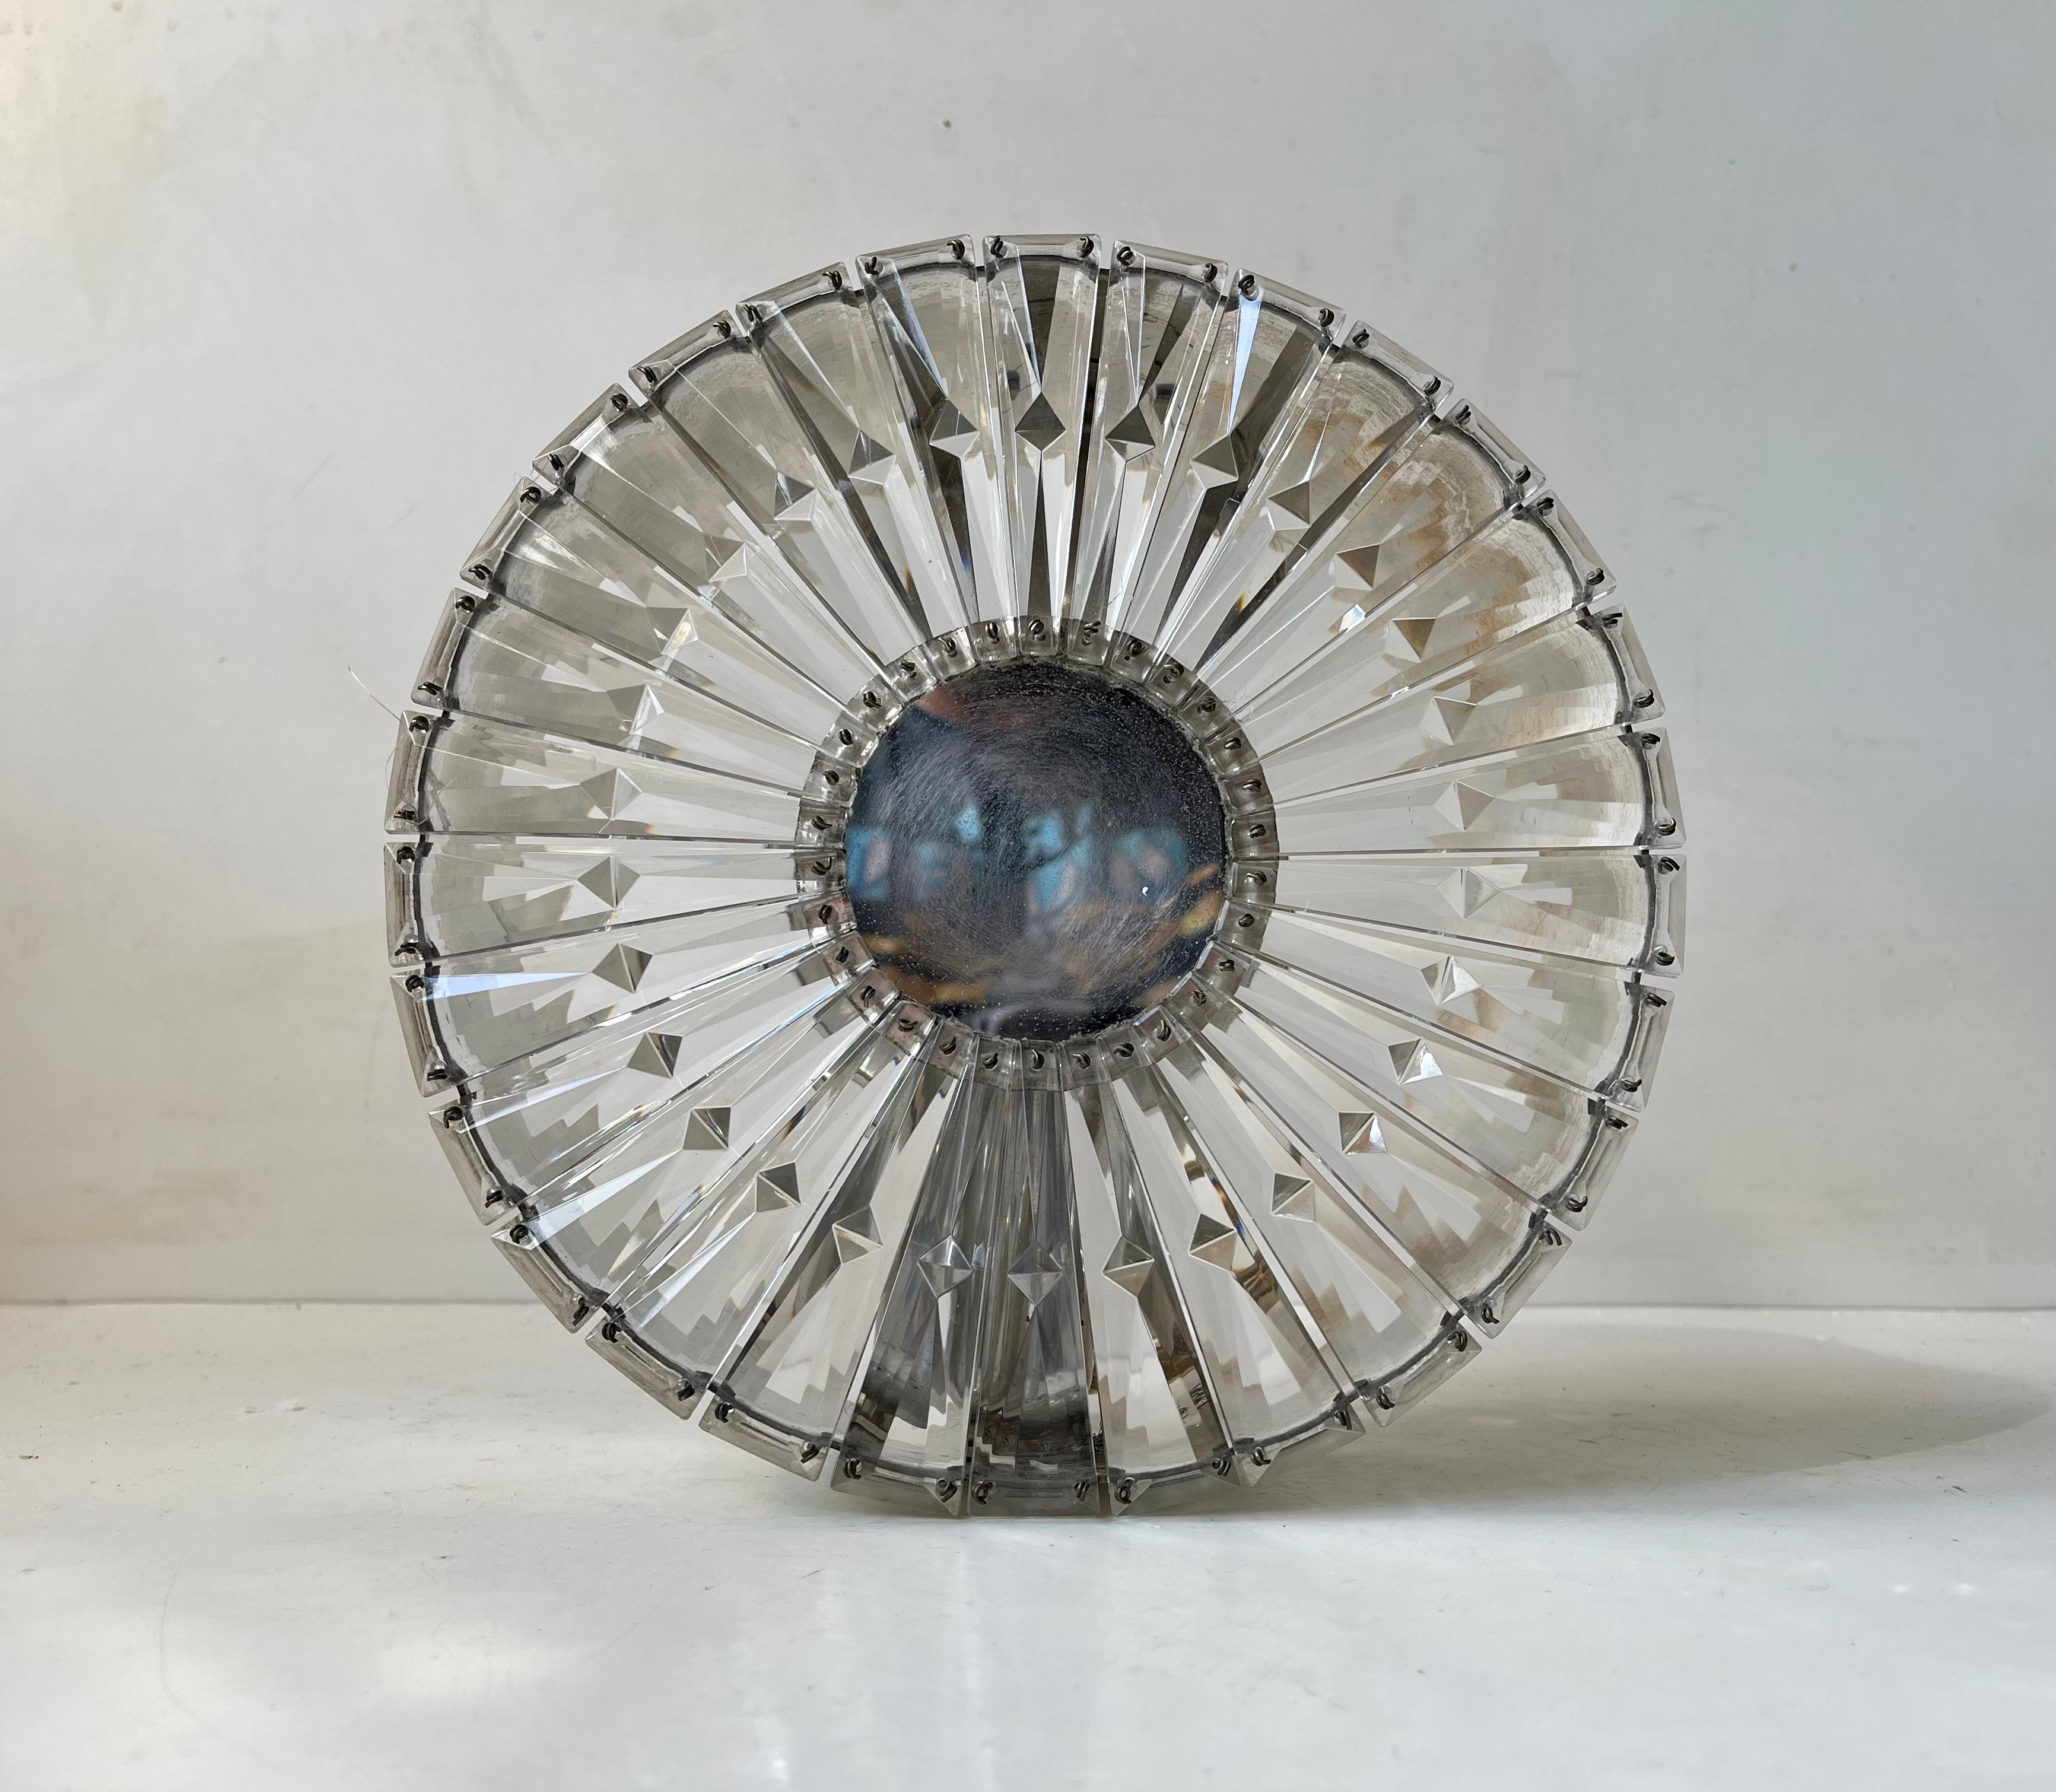 Ornate wall sconce or Flush mount from Glashütte Limburg in Germany. Made during the 1960s. Its made from cut faceted clear crystal glass wire-set on a chromed base. It features a small center mirror. It is to be screwed onto the wall or ceiling.